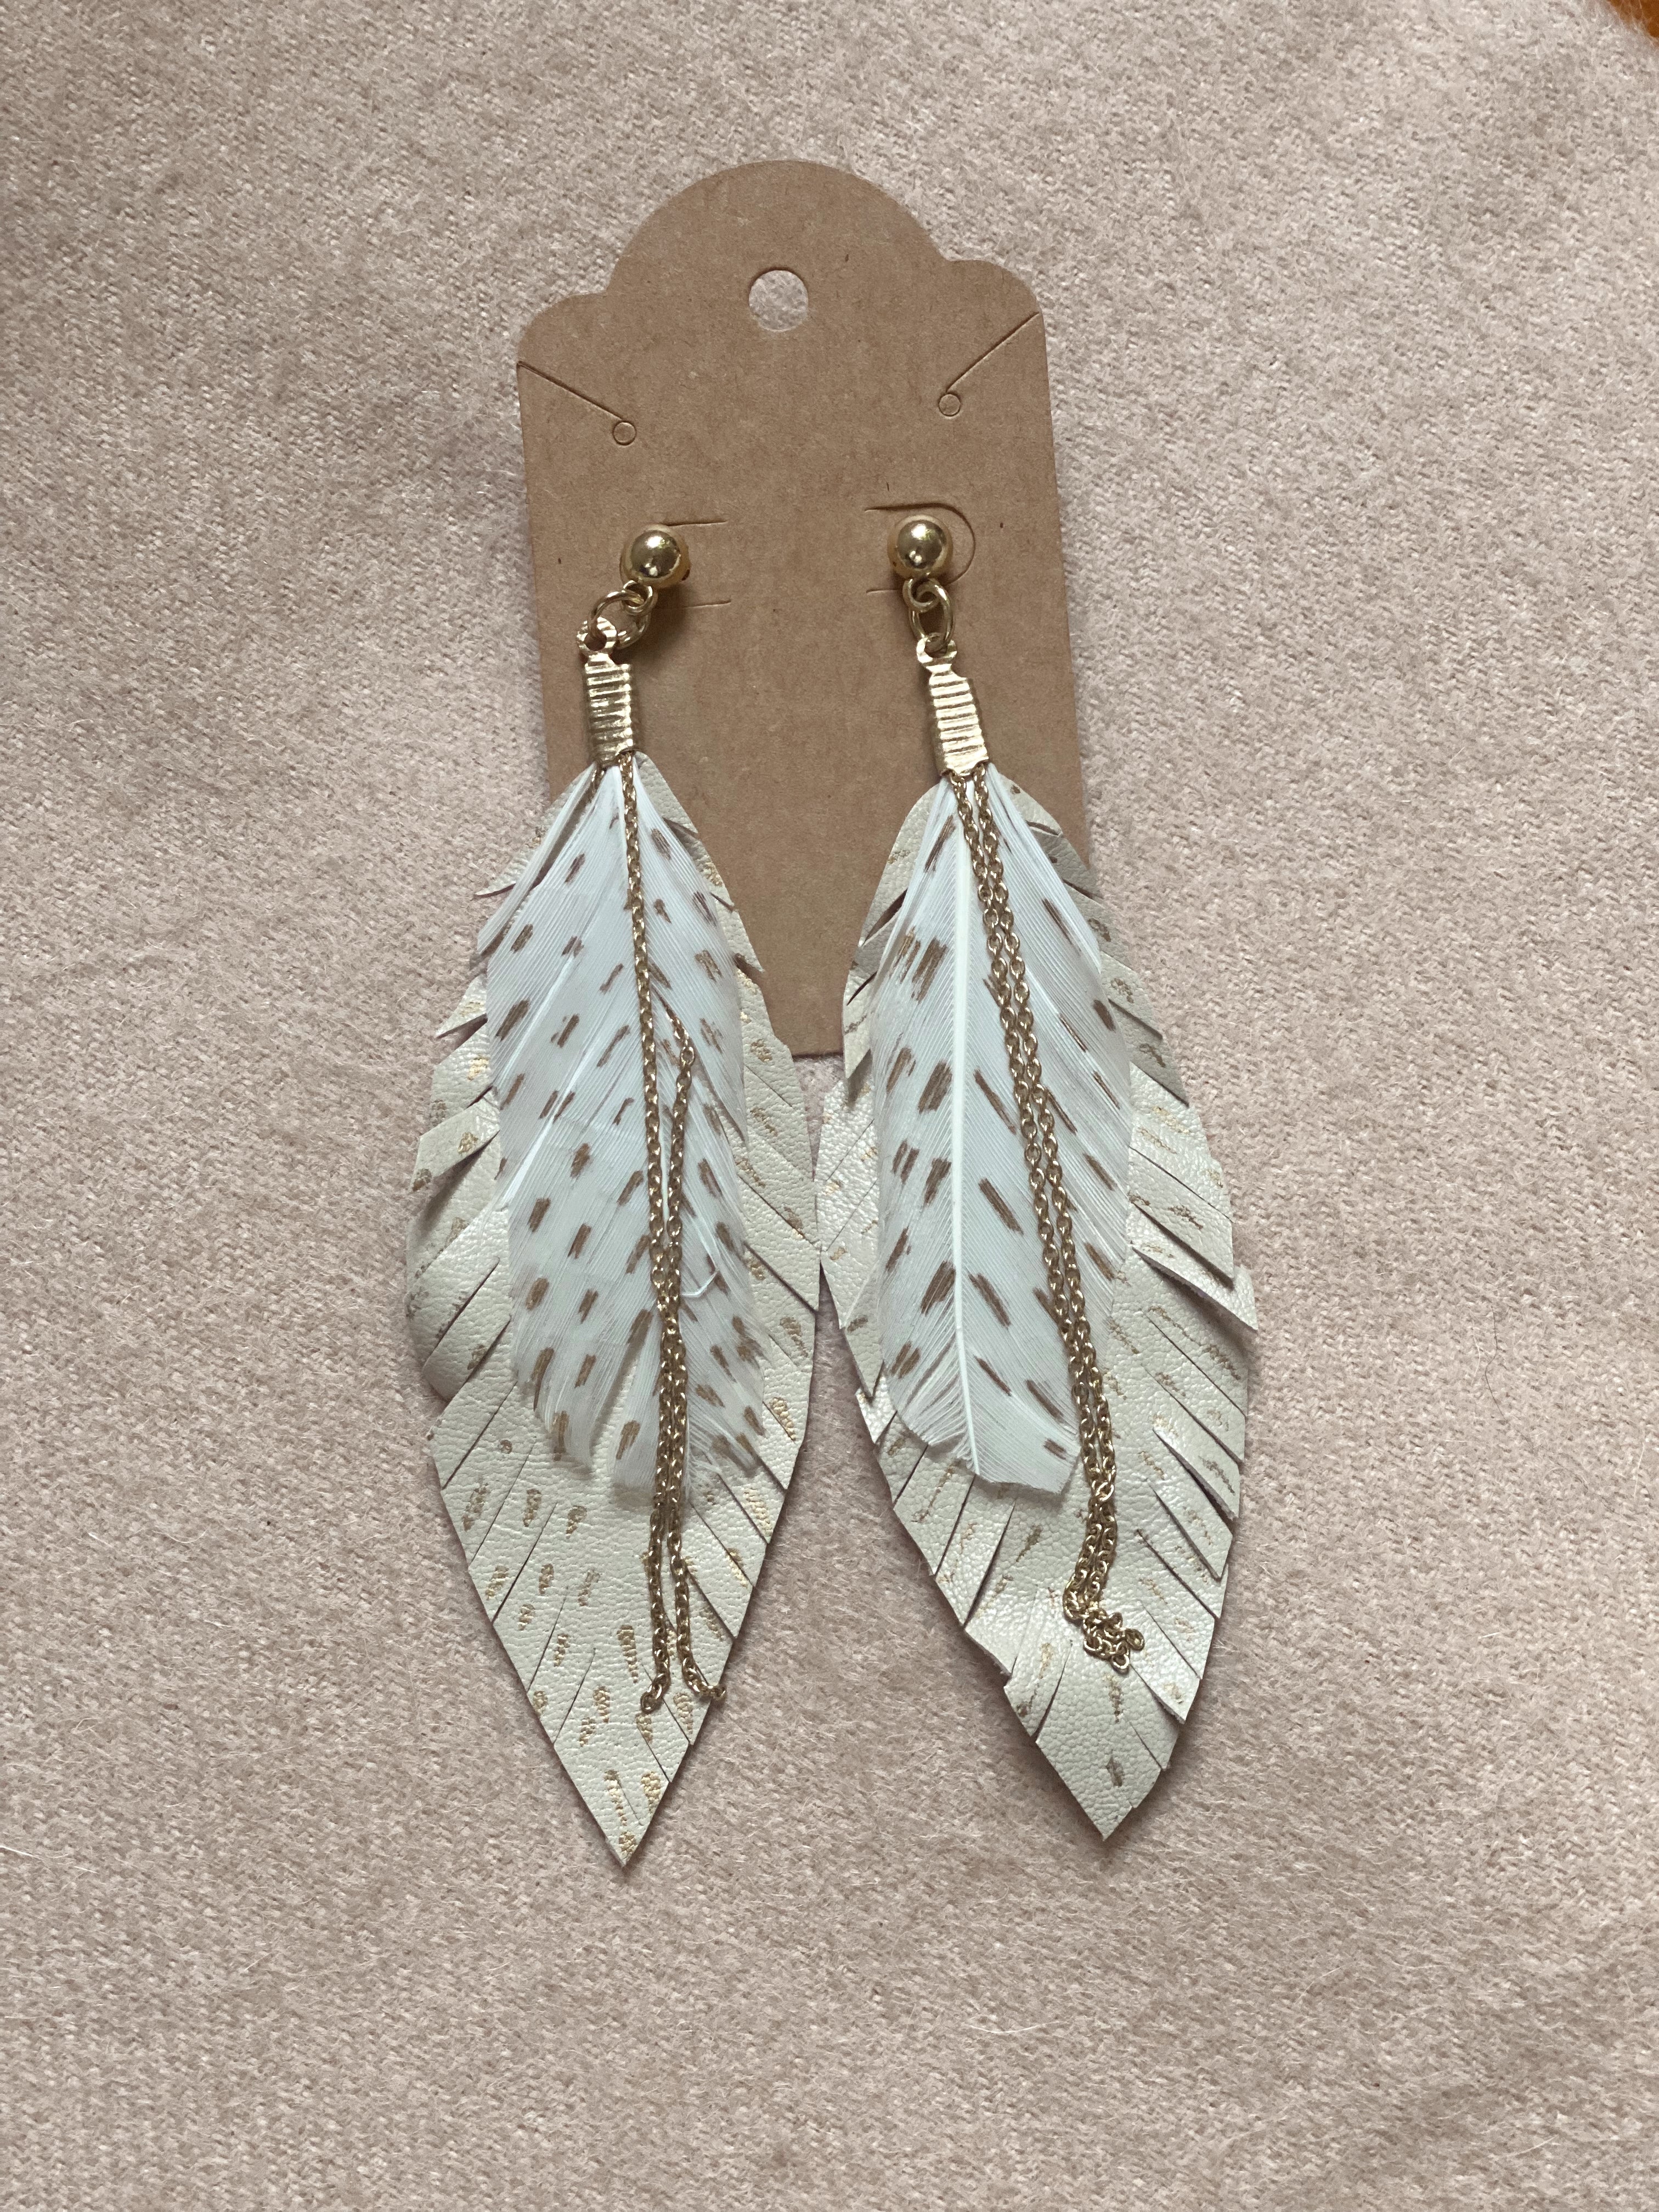 Feathered Indian Earrings Turquoise Traveler 